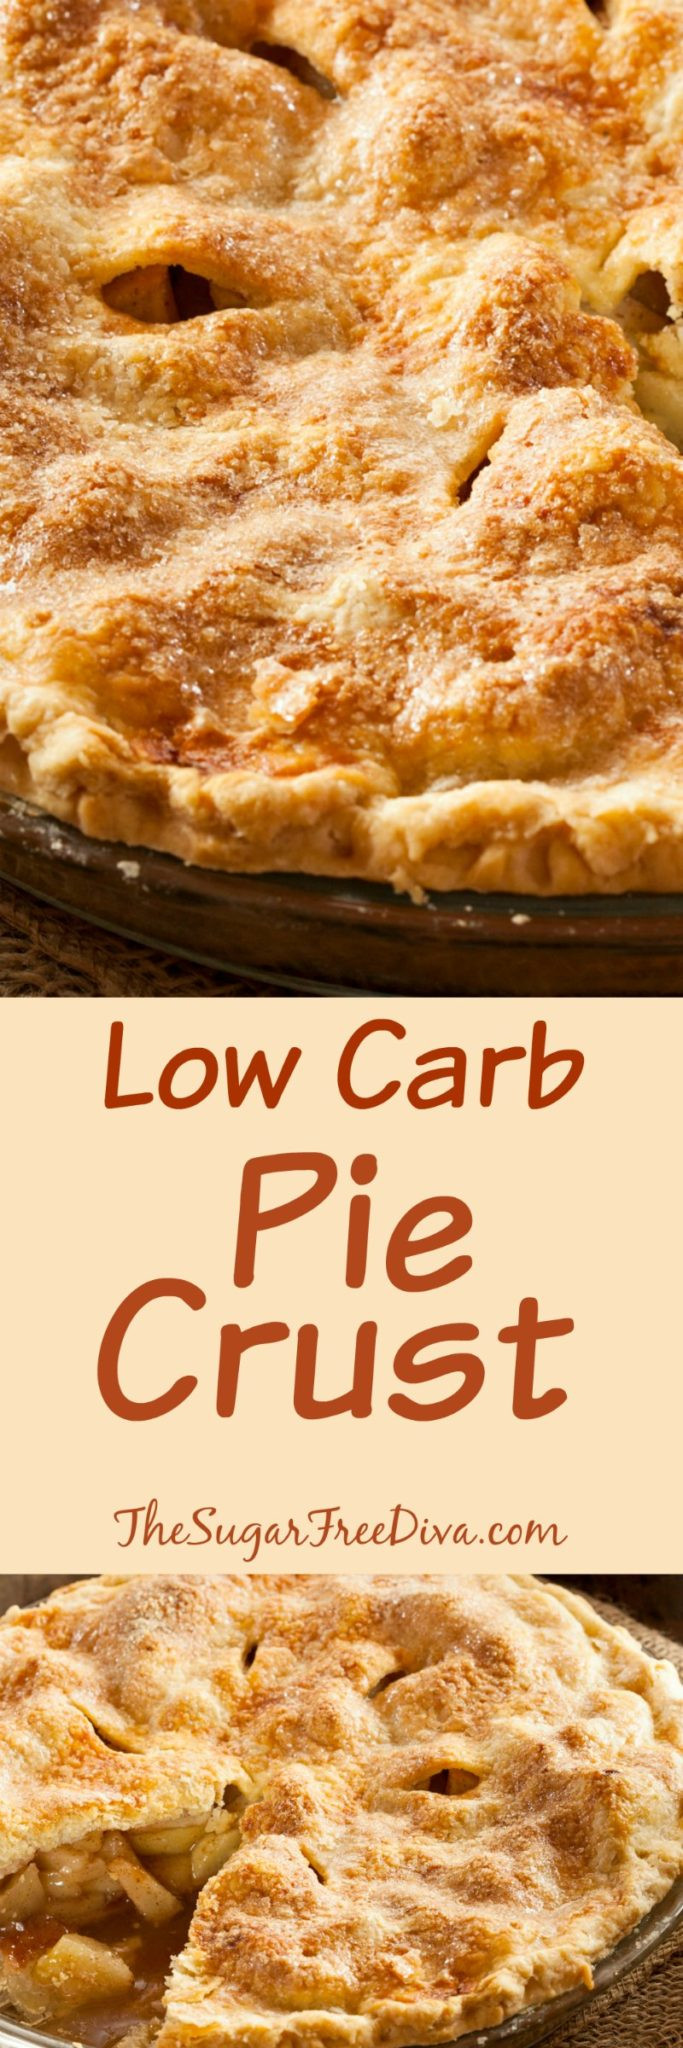 Low Carb Shepherd'S Pie
 How to Make a Low Carb Pie Crust THE SUGAR FREE DIVA